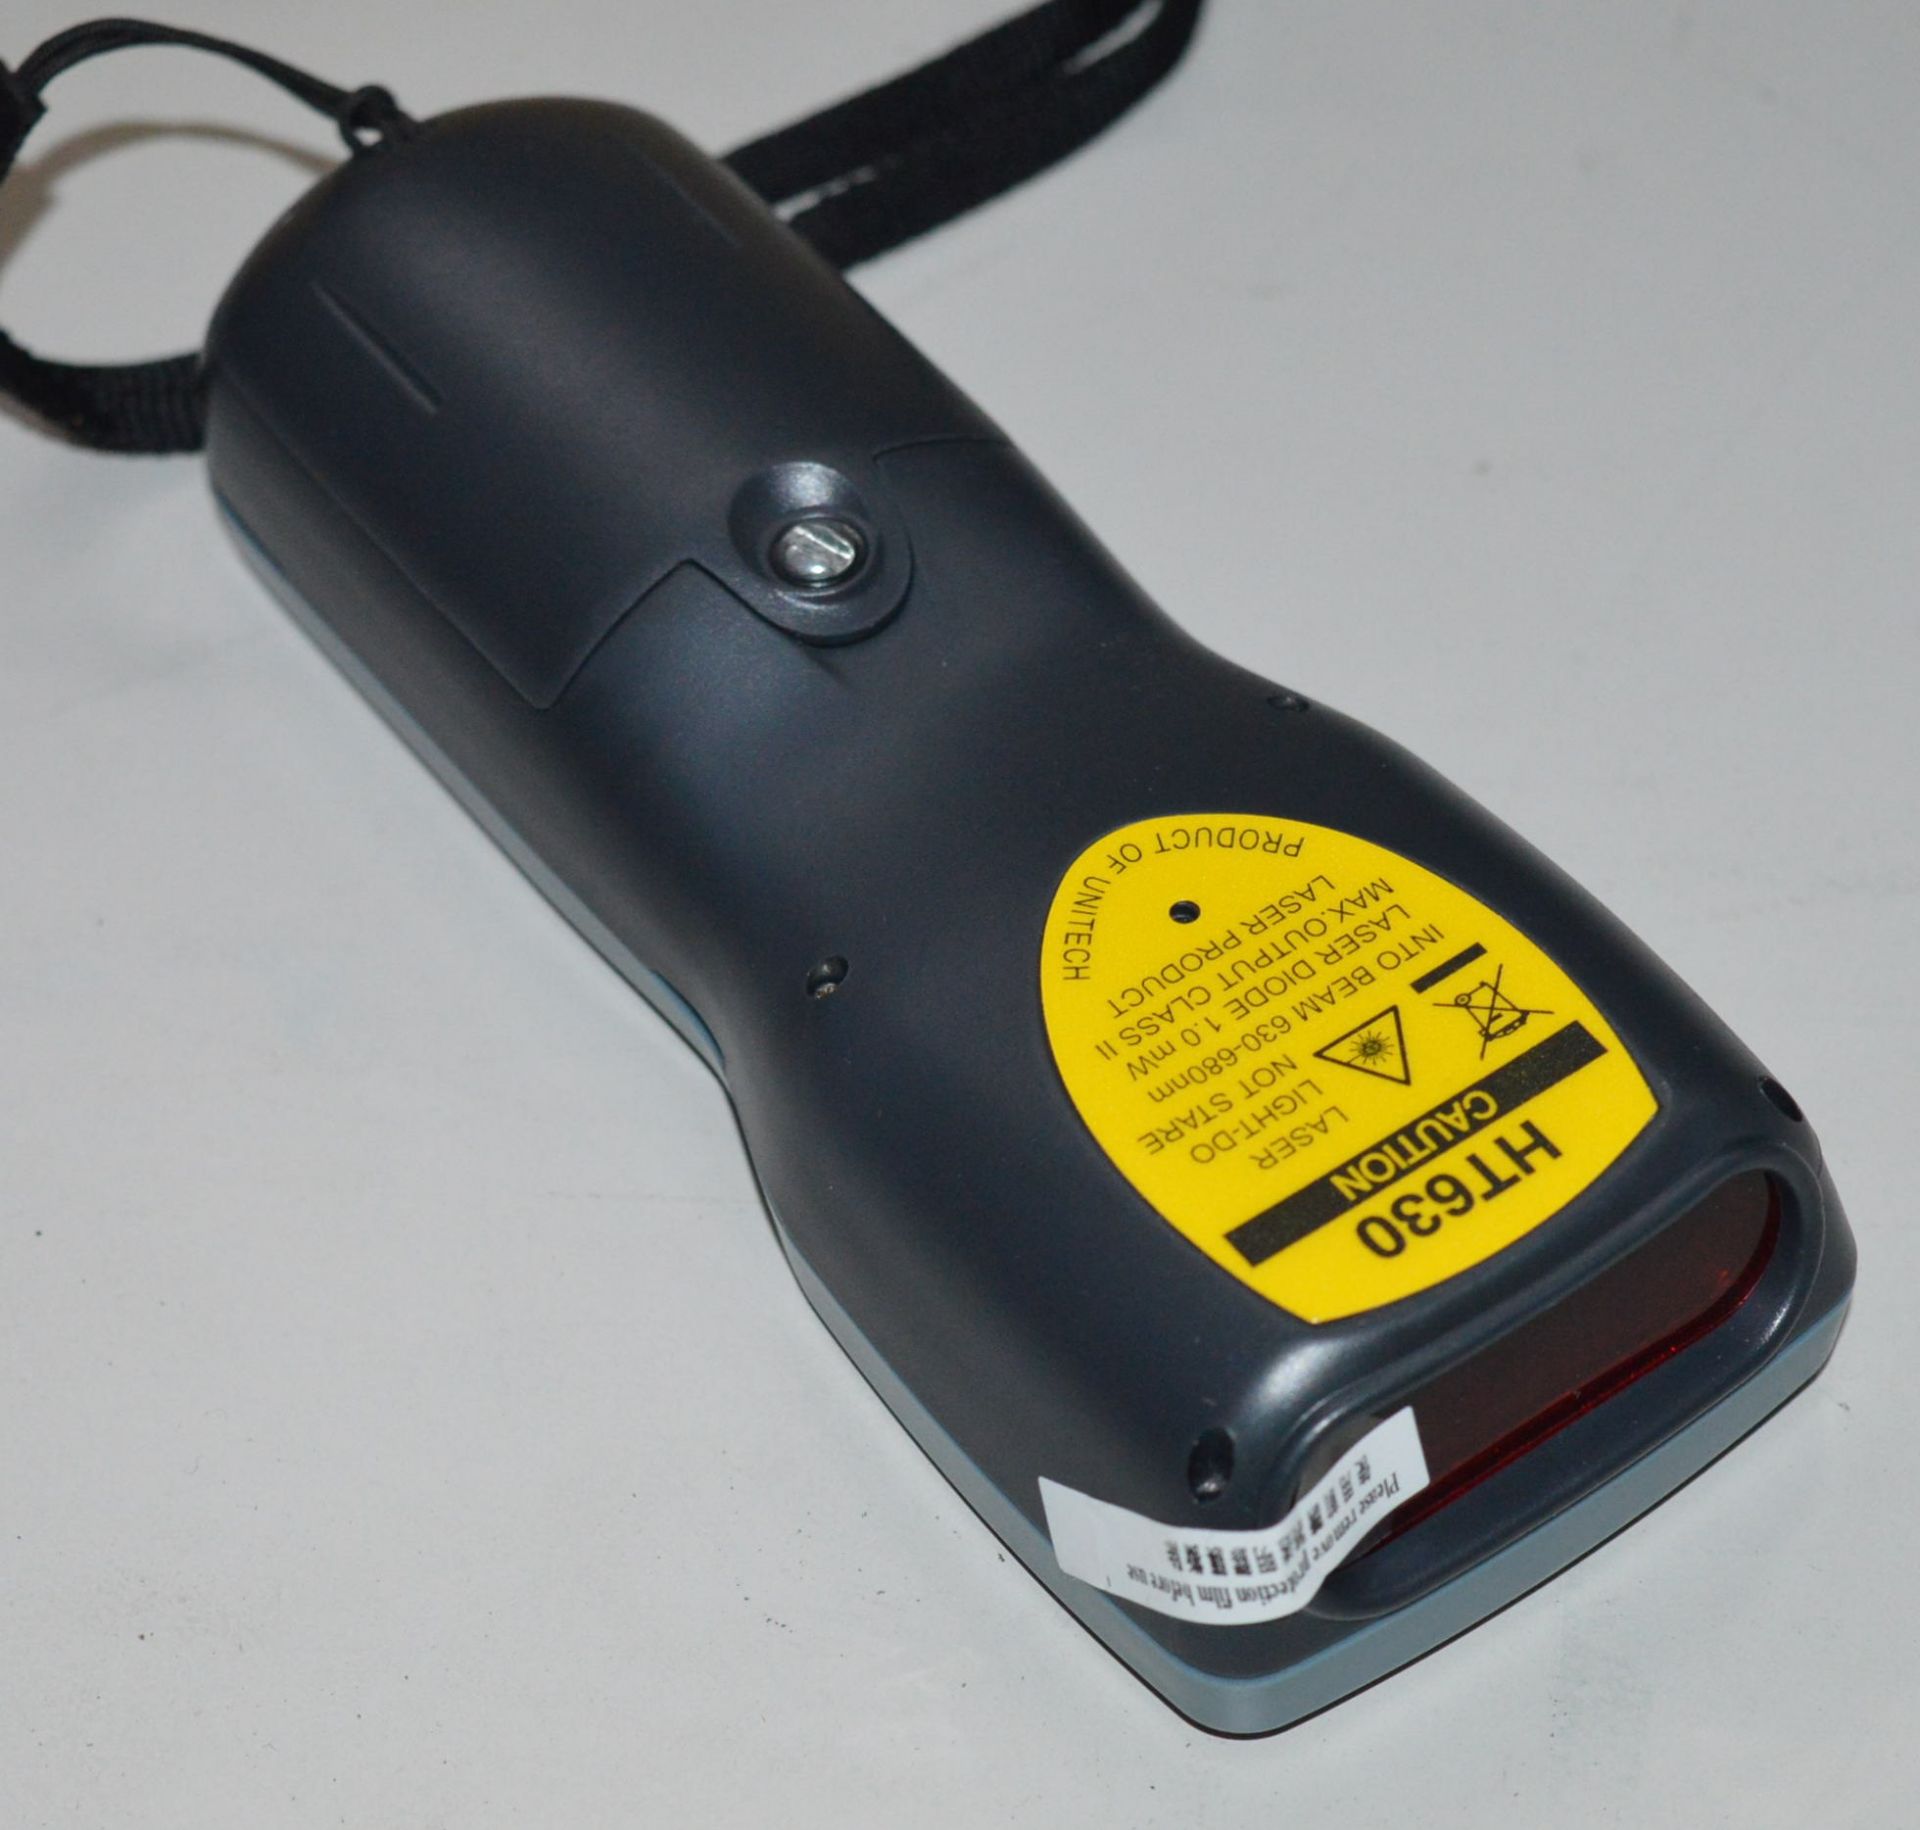 1 x Unitech HT630 Data Terminal Barcode Scanner - RRP £500 - Excellent Condition WITH Box and - Image 4 of 6